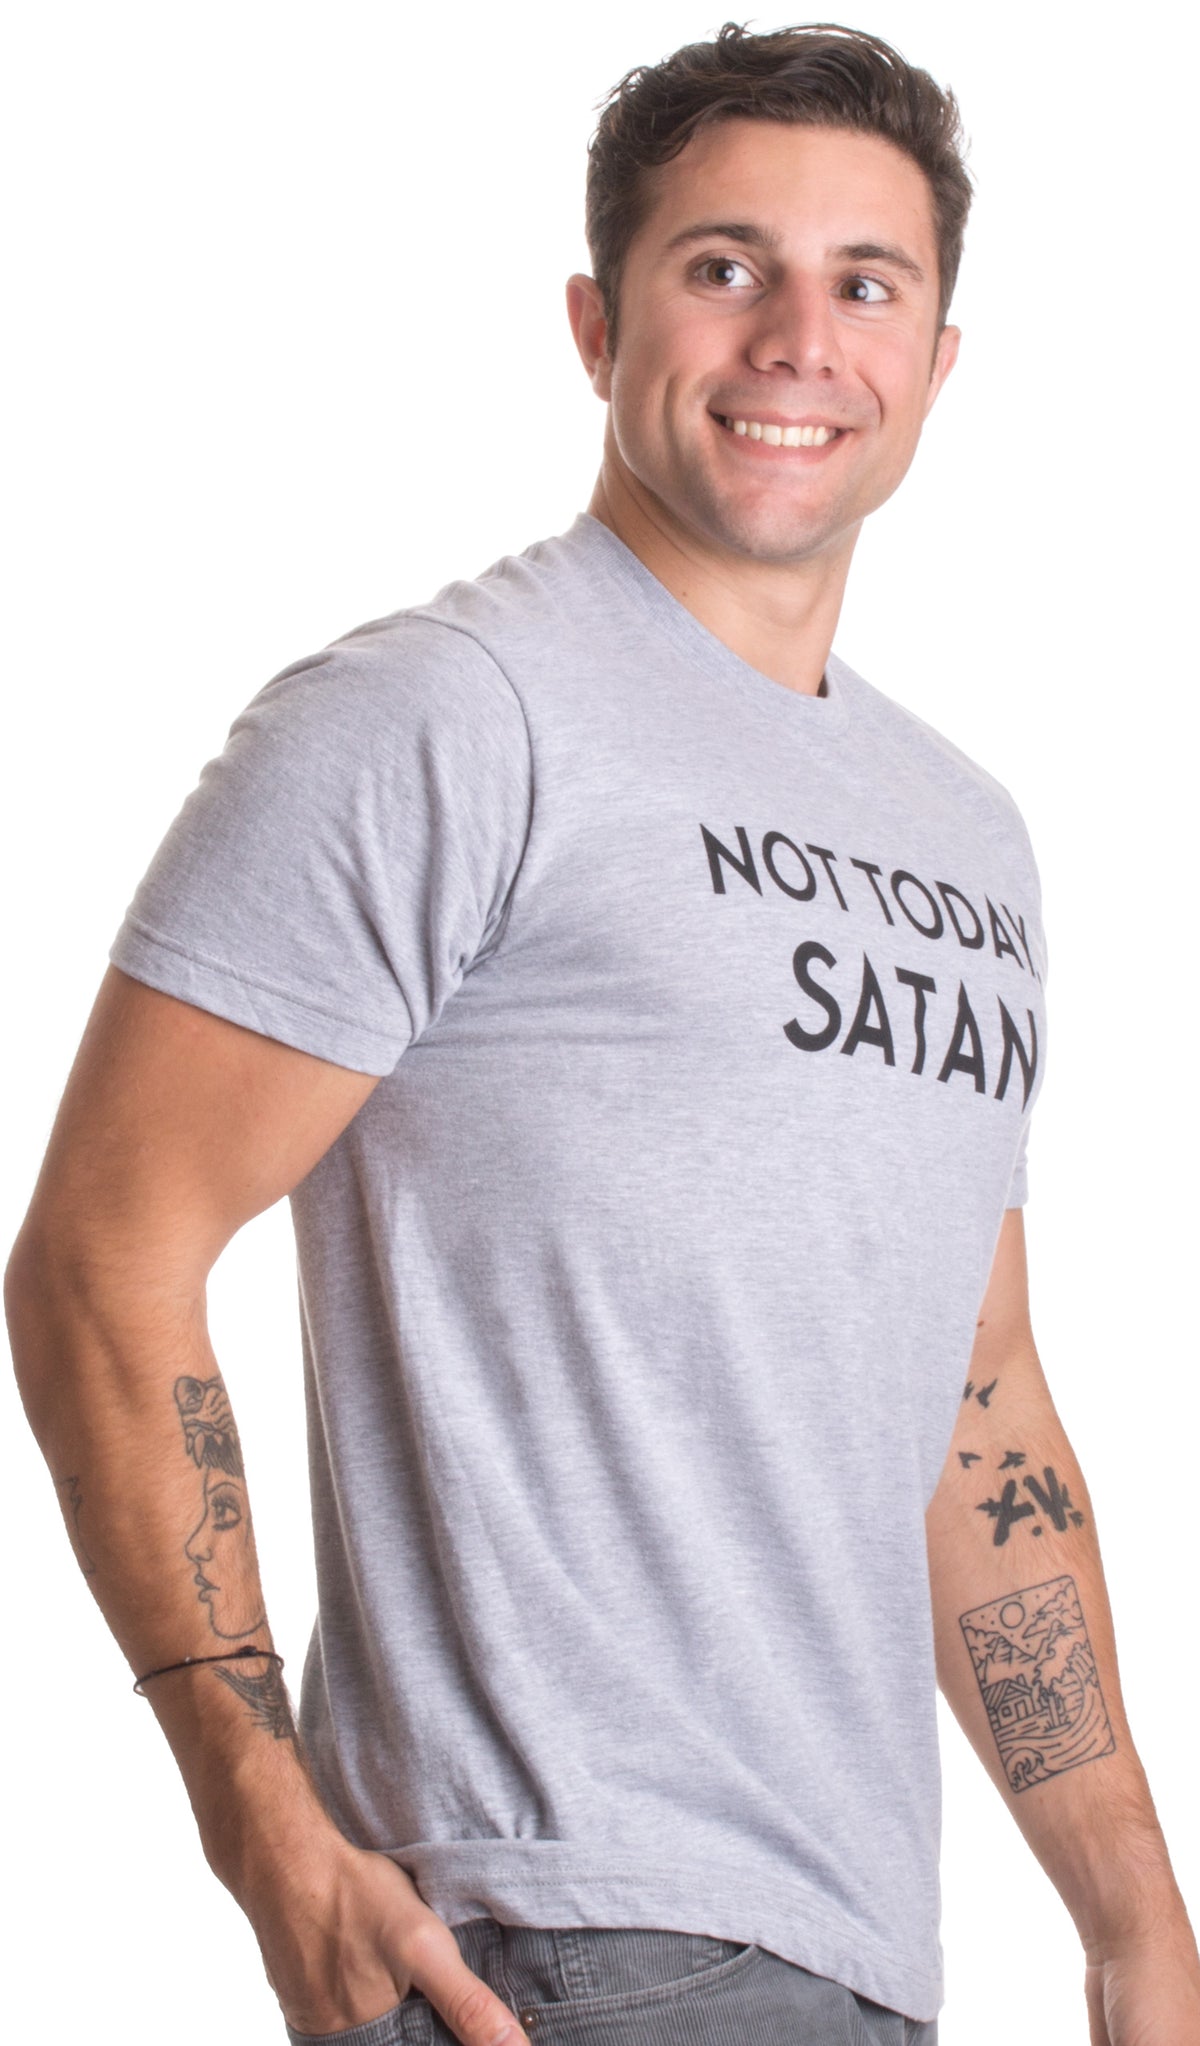 Not Today, Satan | Funny Saying Witty Comment for Men or Women Humor T-shirt